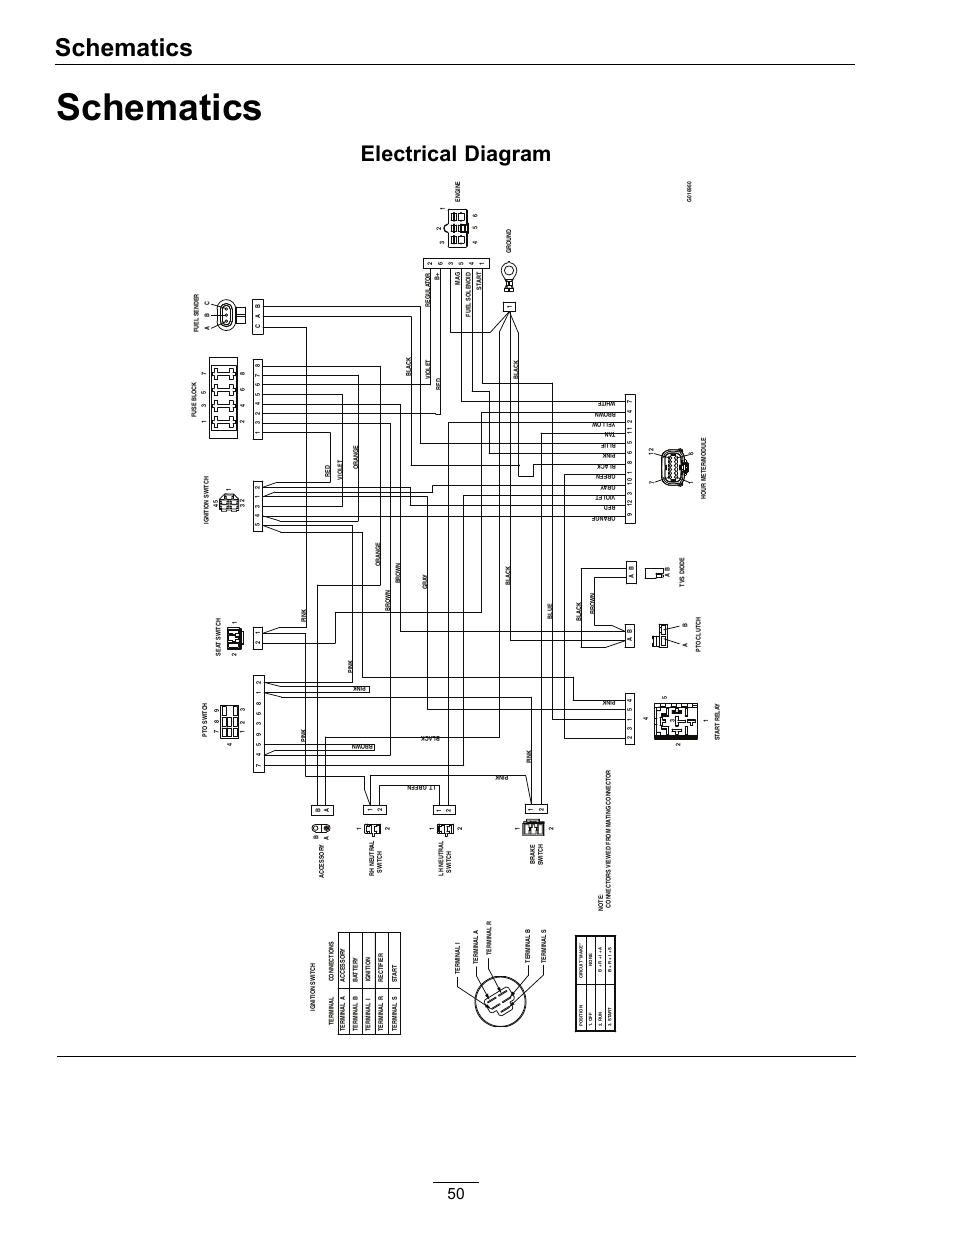 capillary thermostat wiring diagram